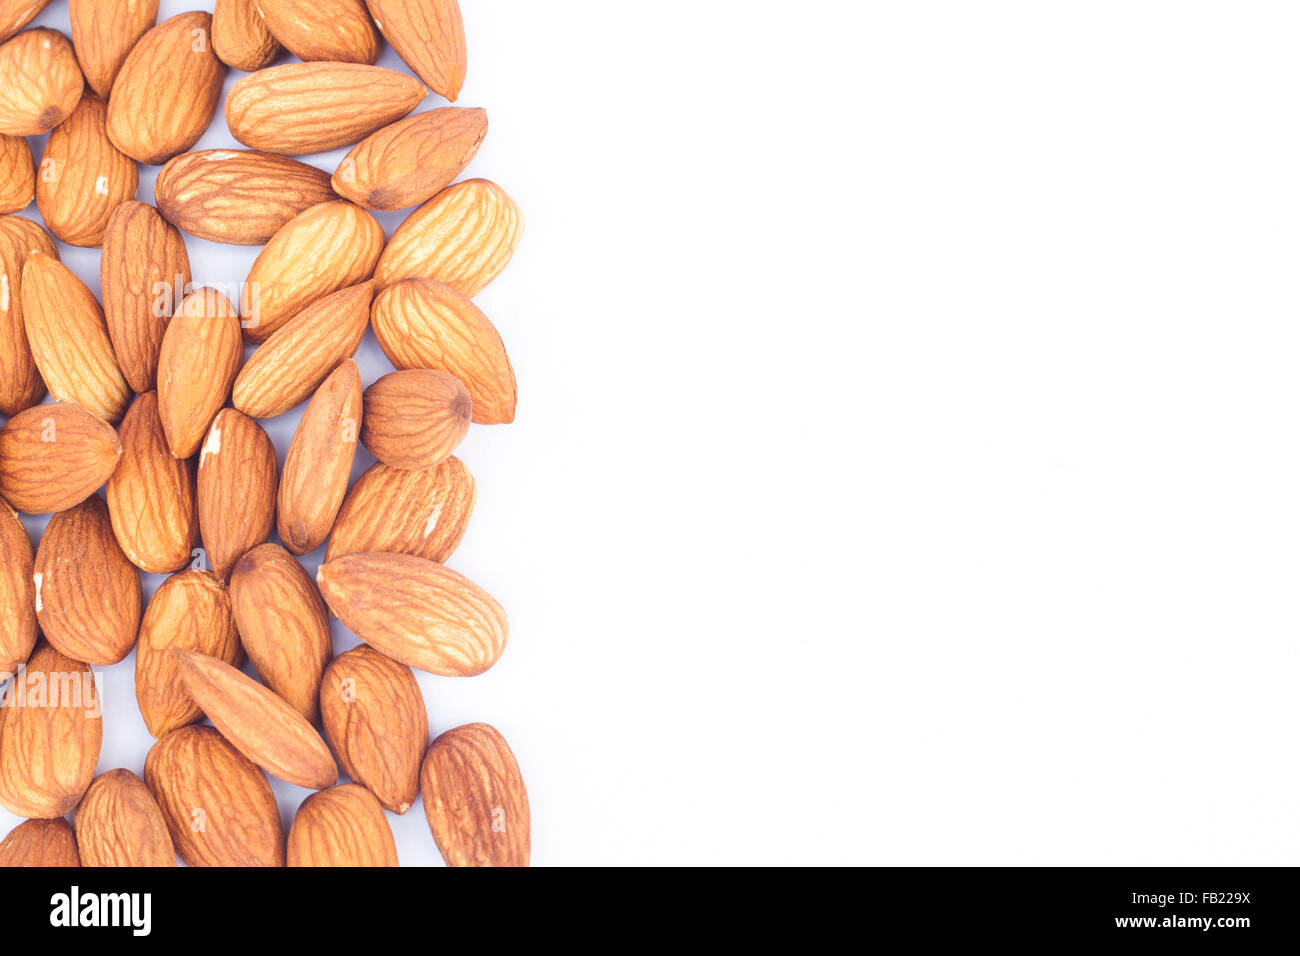 Almond nuts isolated on white background, stock photo Stock Photo